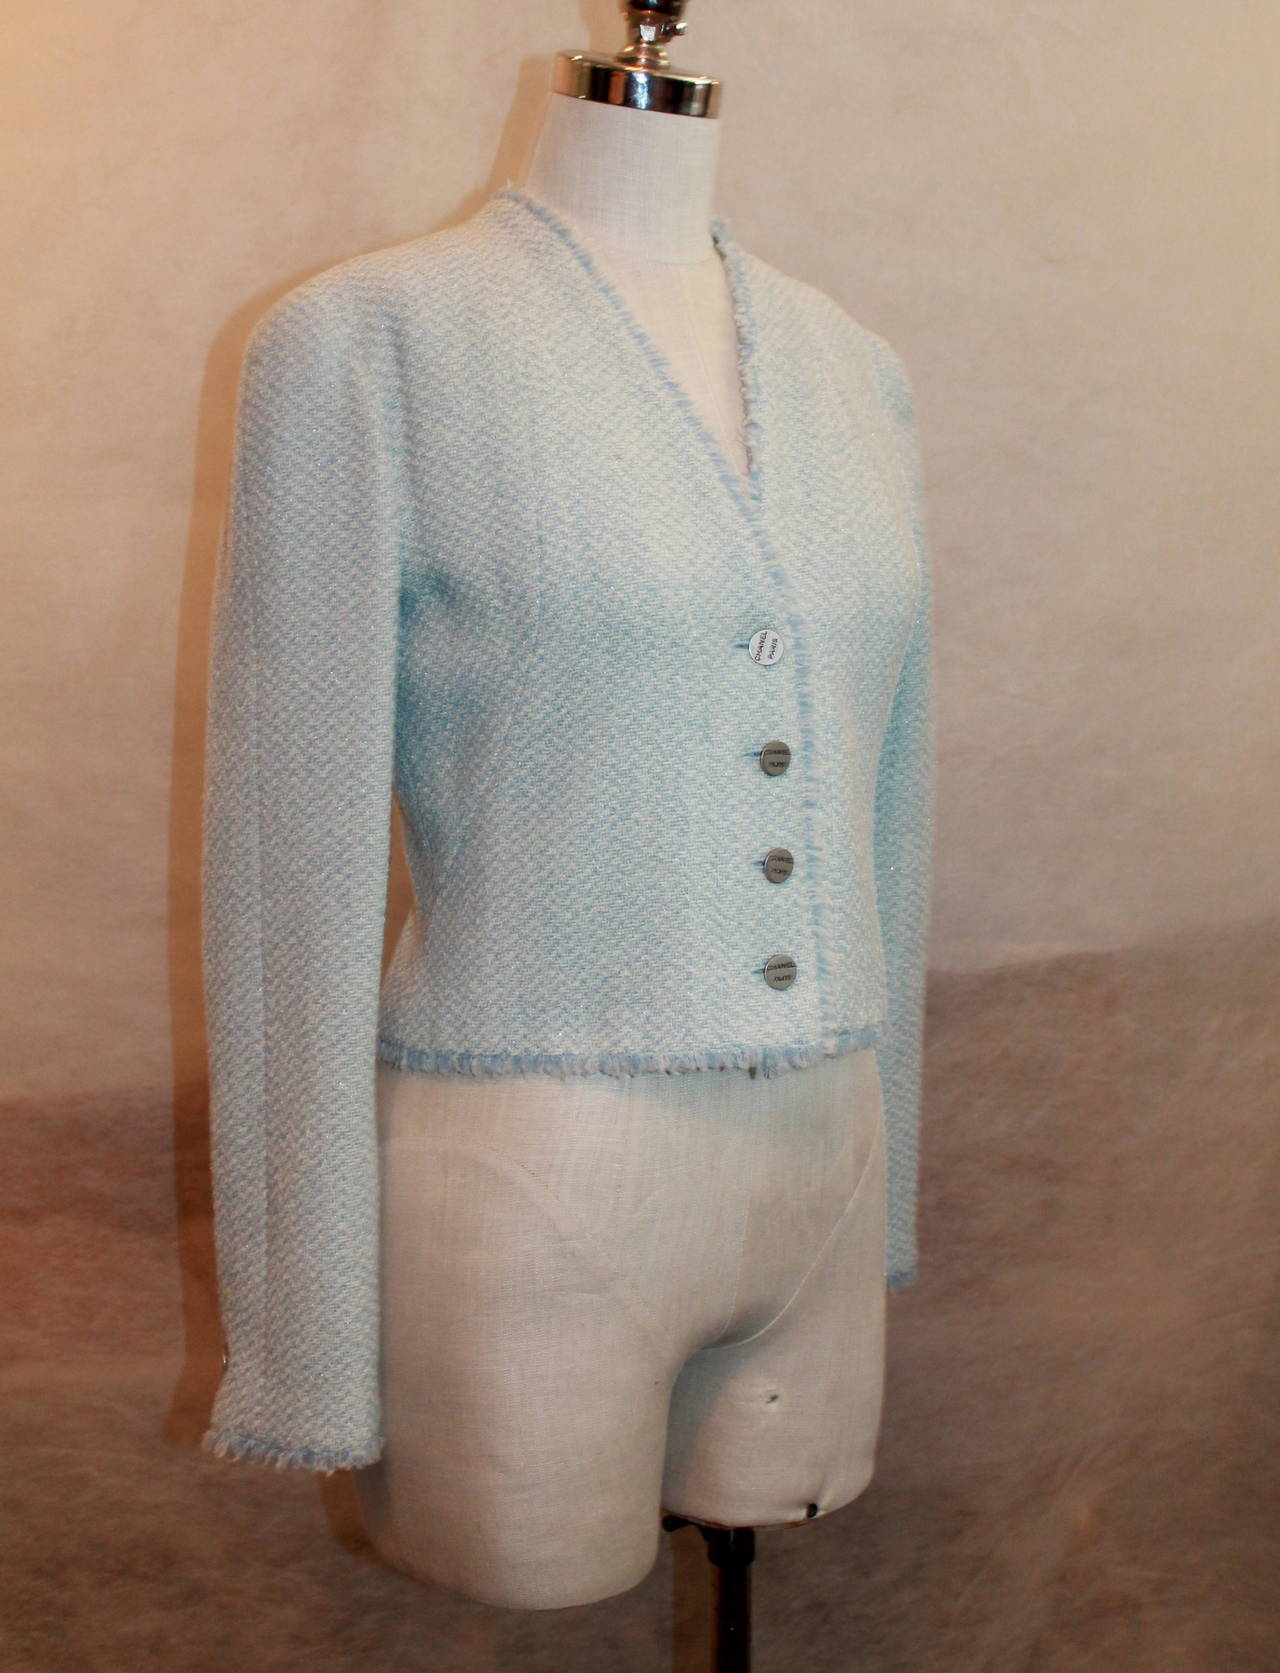 Chanel 2000 Baby Blue & White Tweed Crop Jacket with Fringe Trim - 38. This jacket is in excellent condition with light use. It is 62% wool, 26% polyester, and 12% nylon with a silk lining.

Measurements:
Sleeve Length- 24